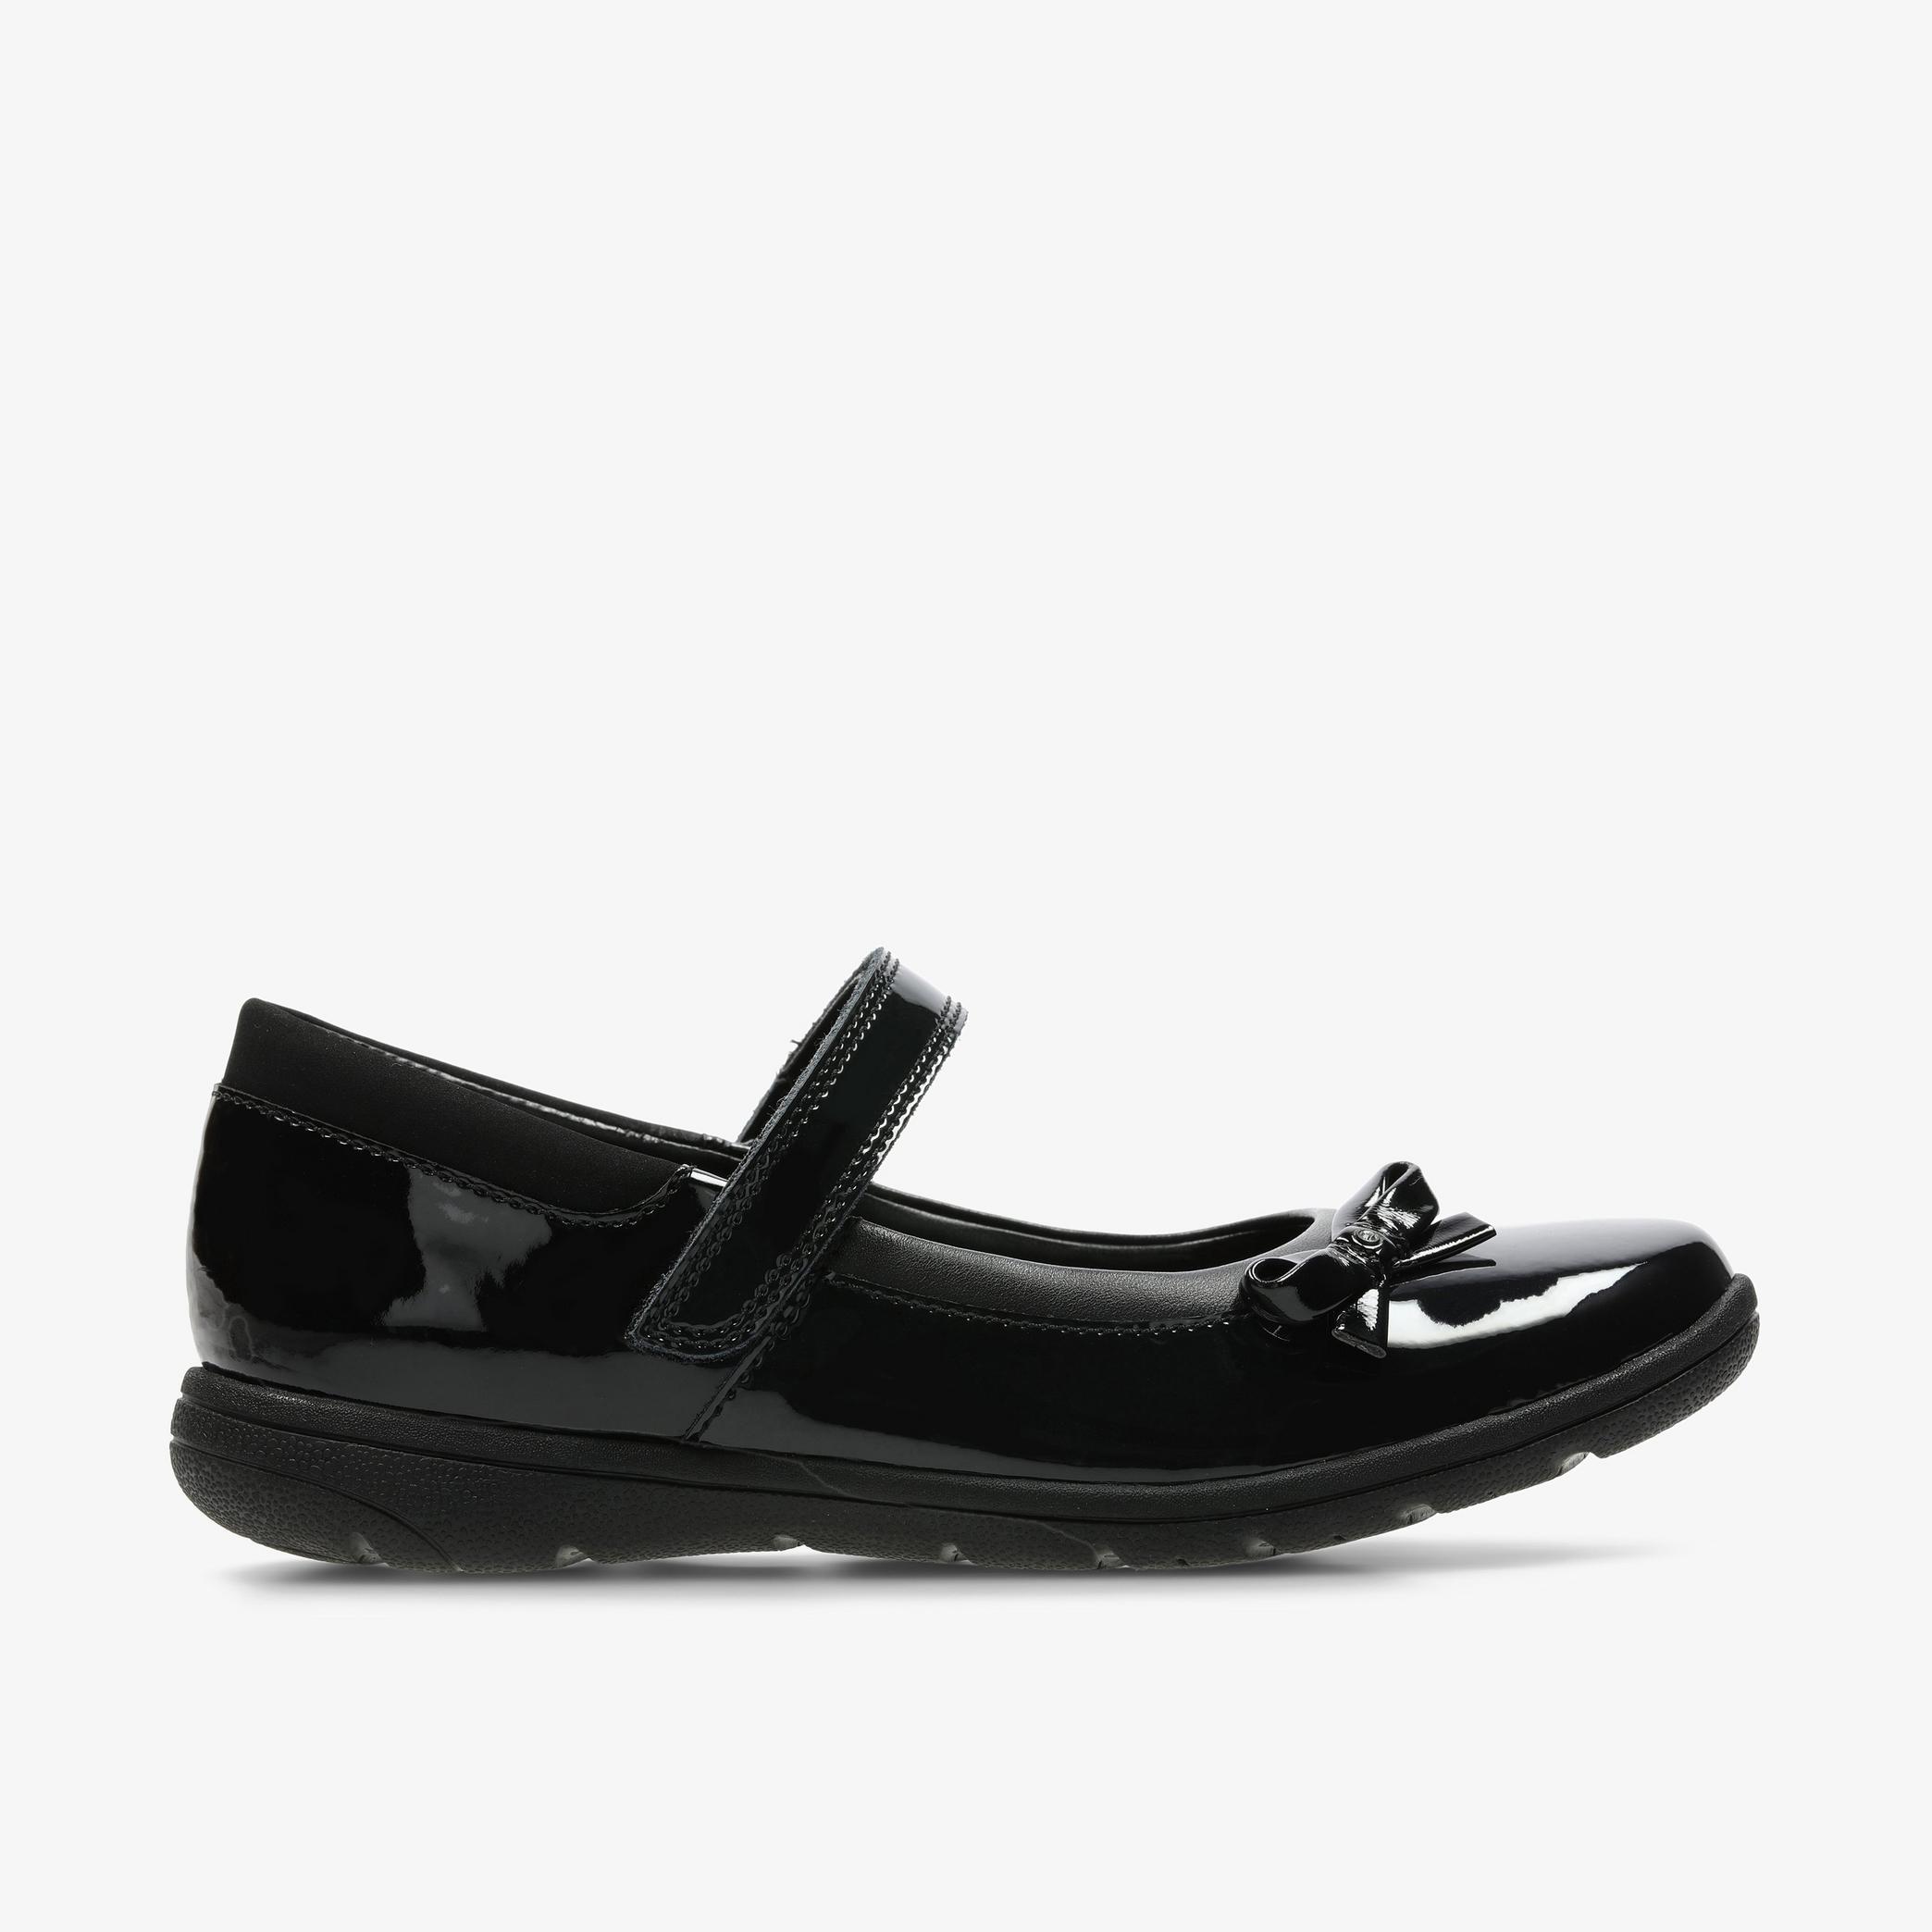 Venture Star Black Patent Leather Shoes, view 1 of 6